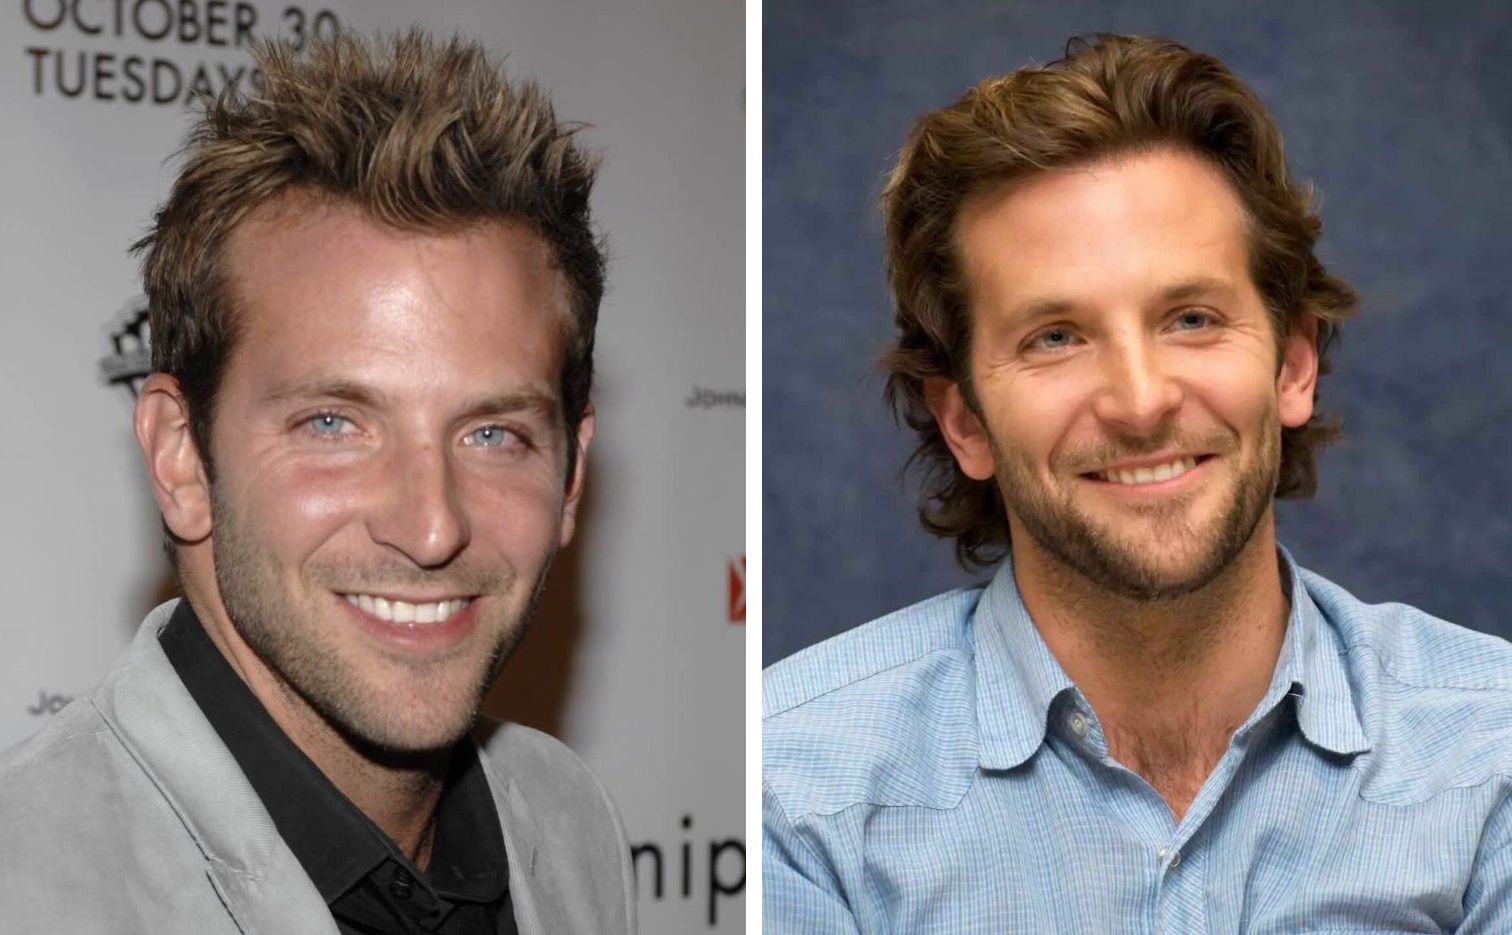 Bradley Cooper’s hairline changed between 2007 and 2008